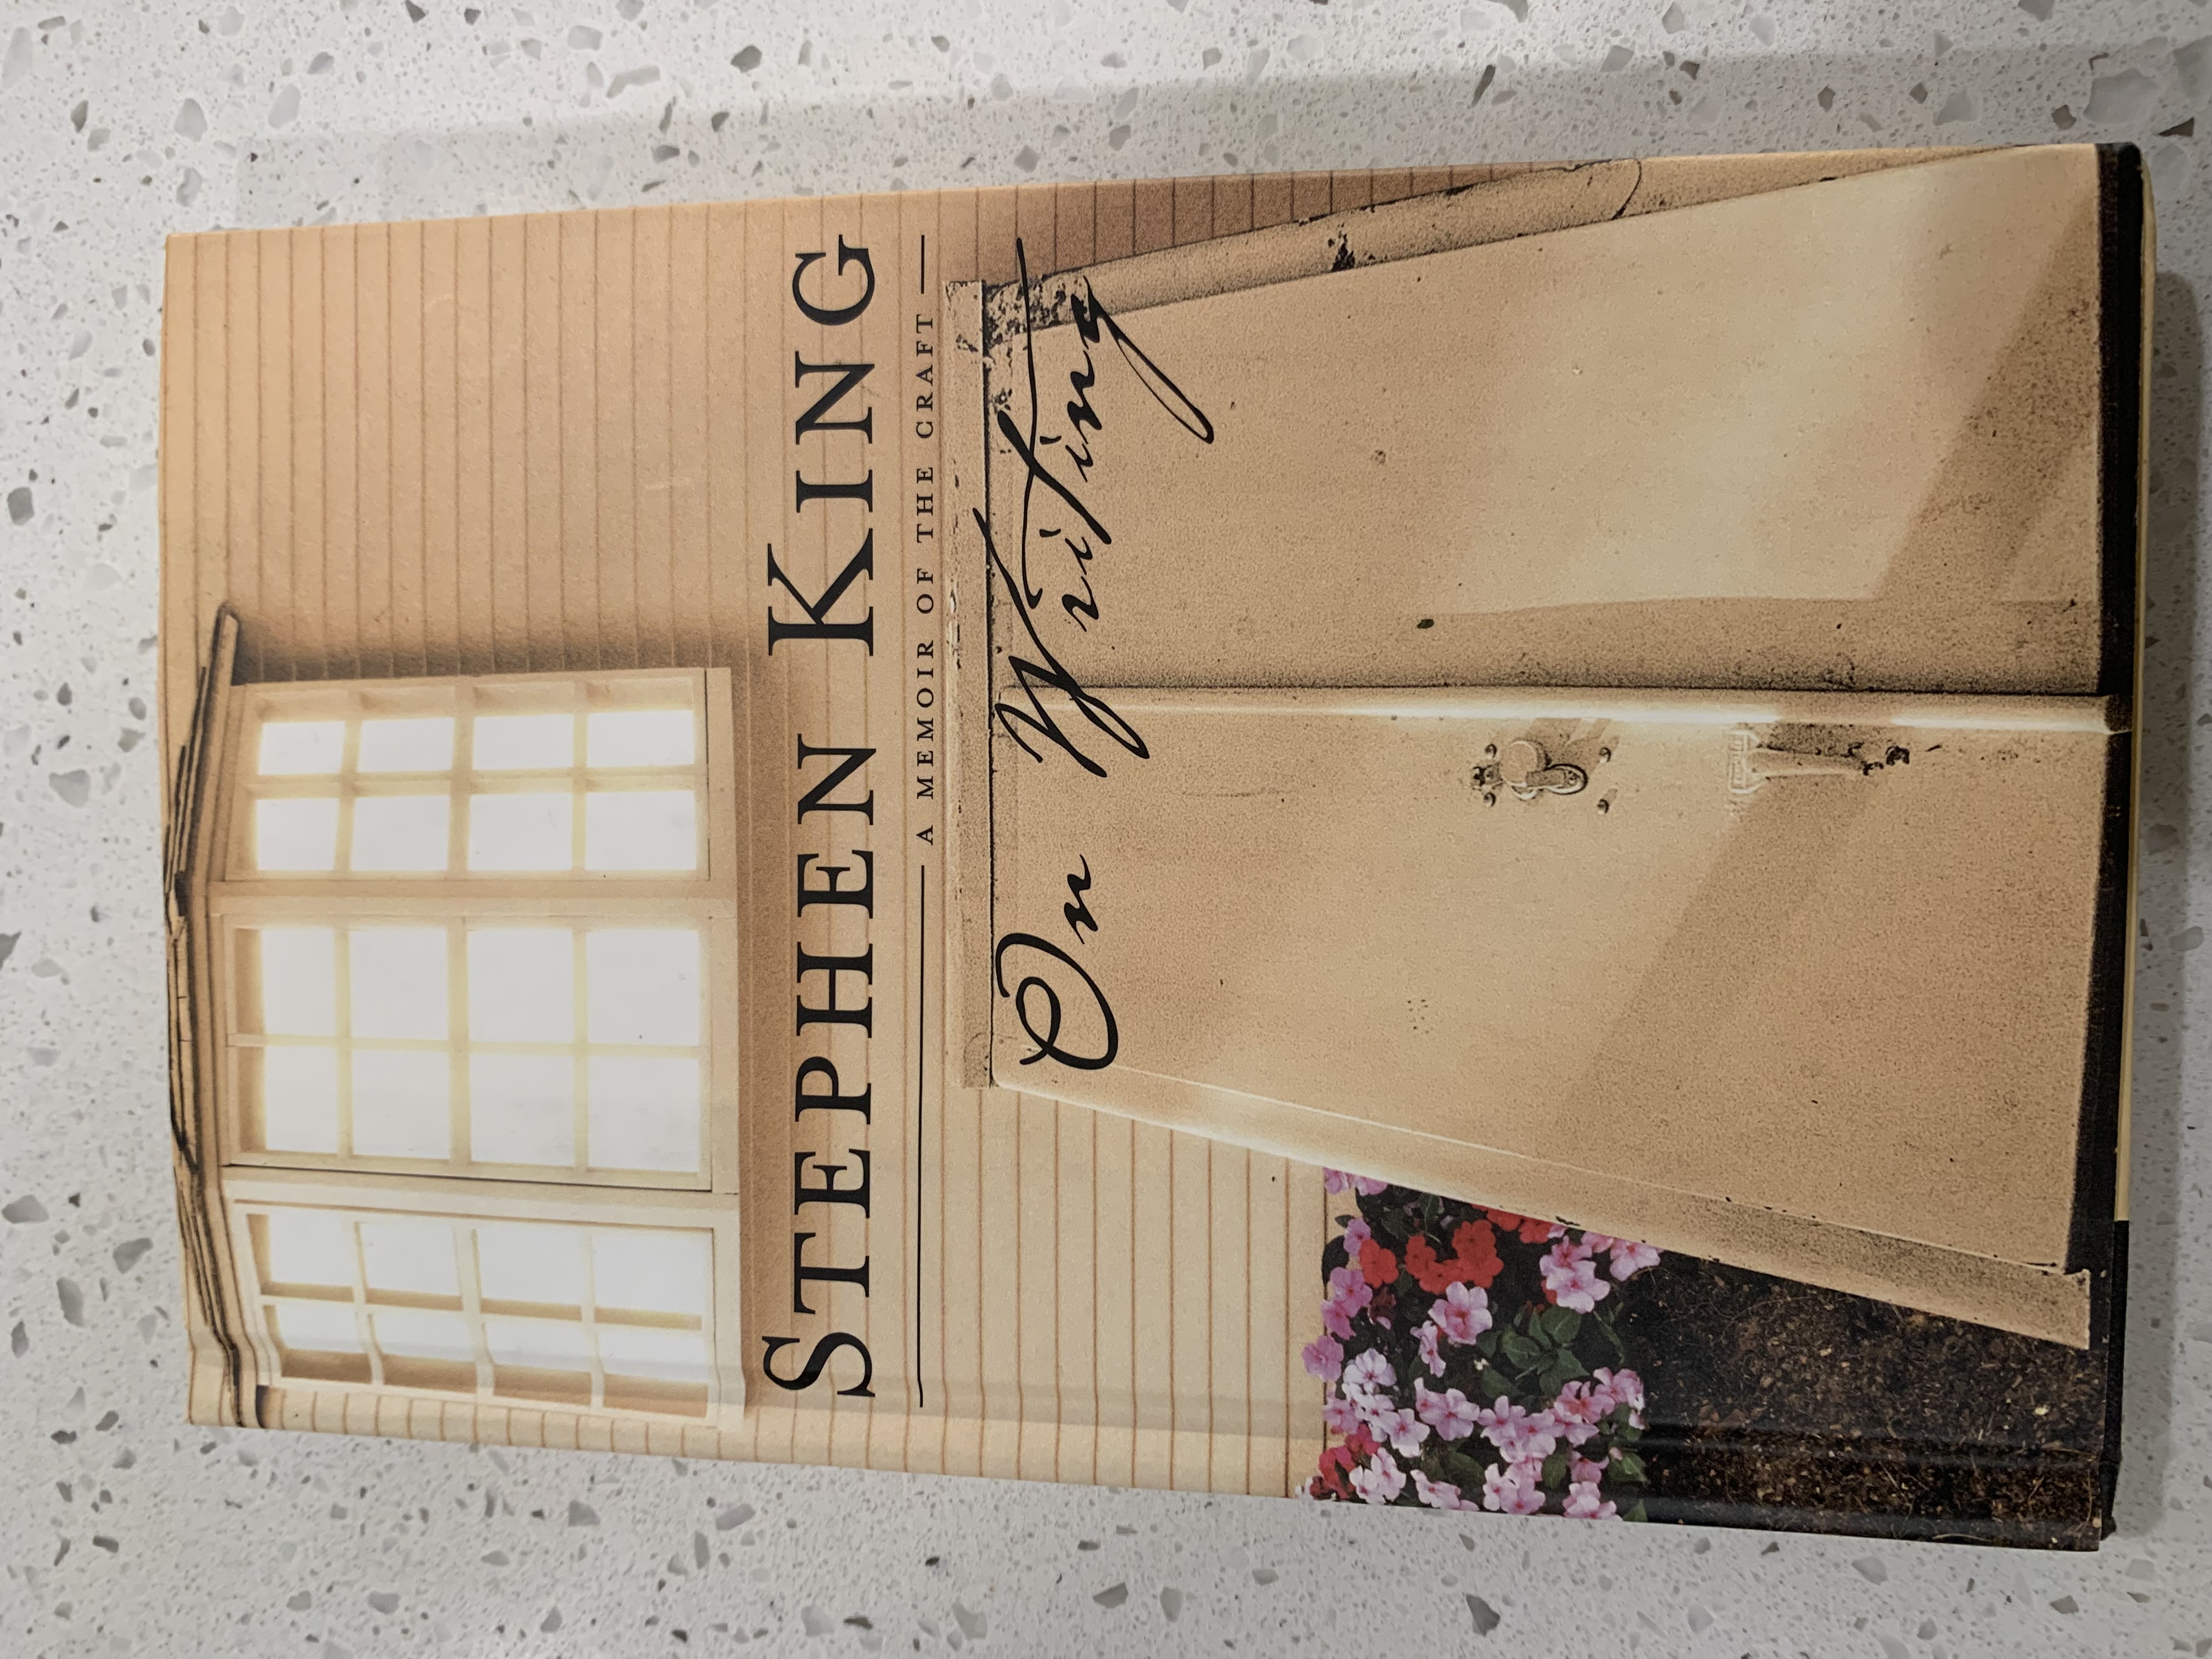 1st　Hardcover　A　Writing　Good　Craft　King:　the　Stephen　Memoir　by　On　of　Tutor　Edition　Novel